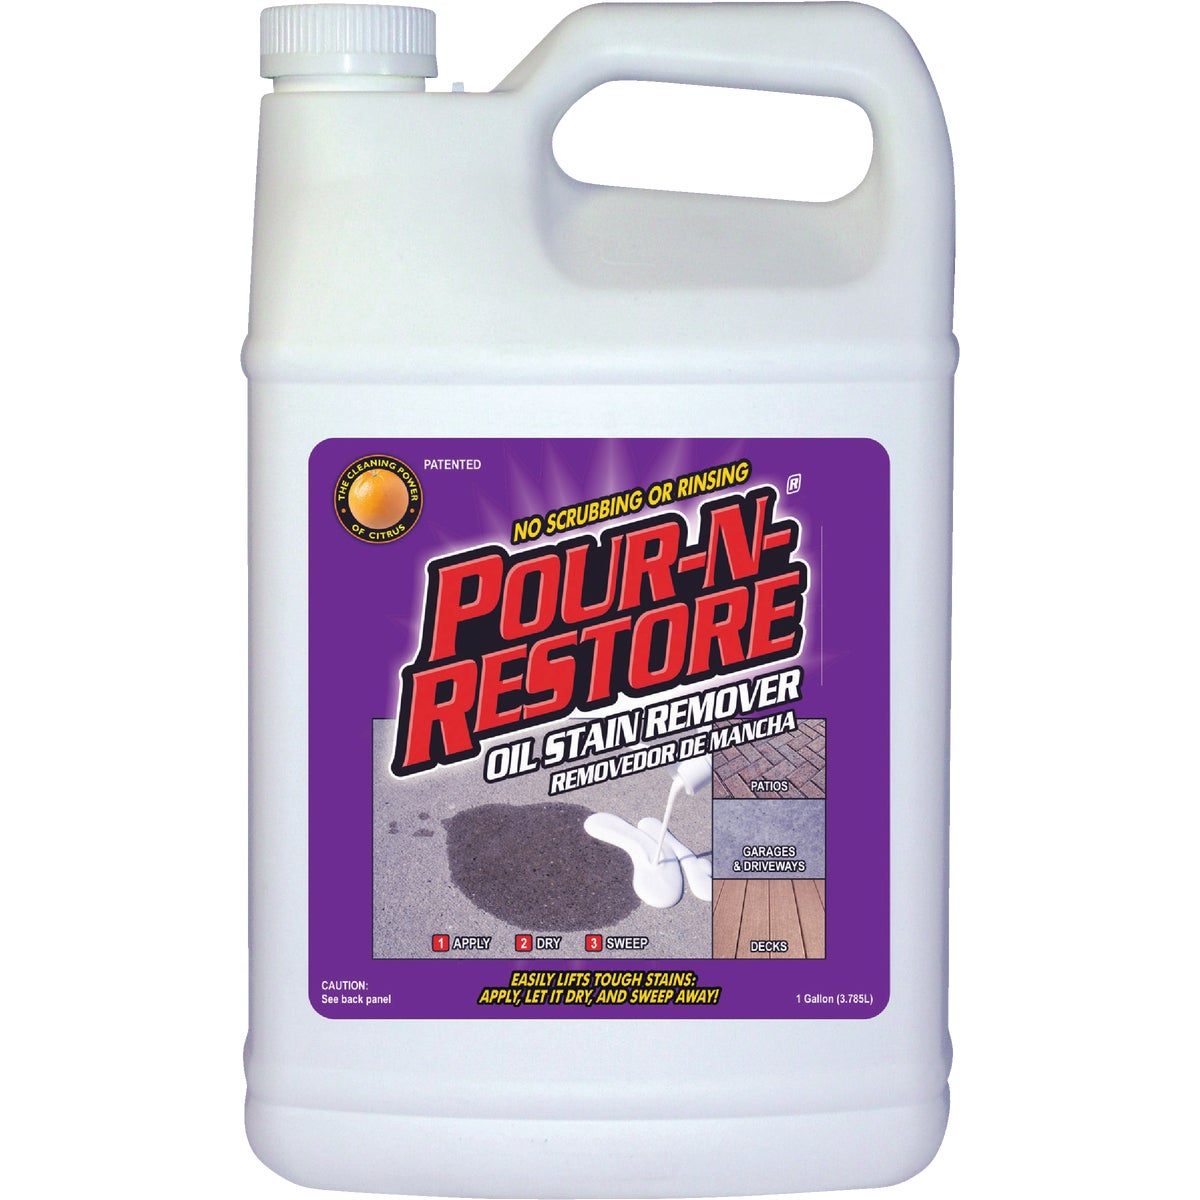 Pour-N-Restore 1 Gal. Concrete And Masonry Oil Stain Remover